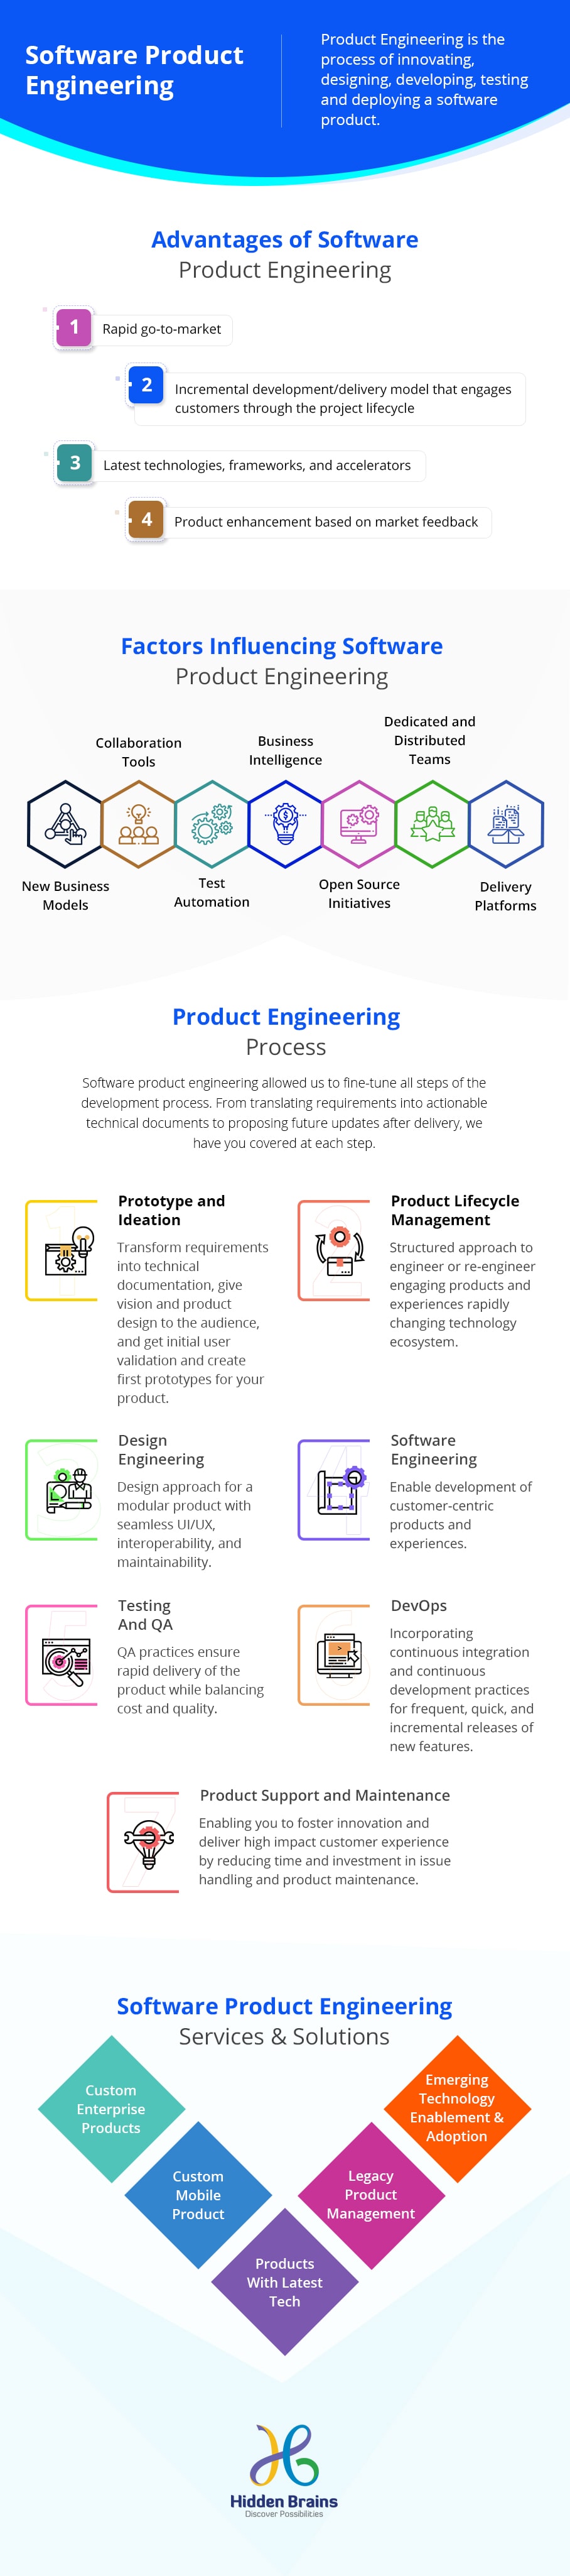 infographic software product engineering for business growth